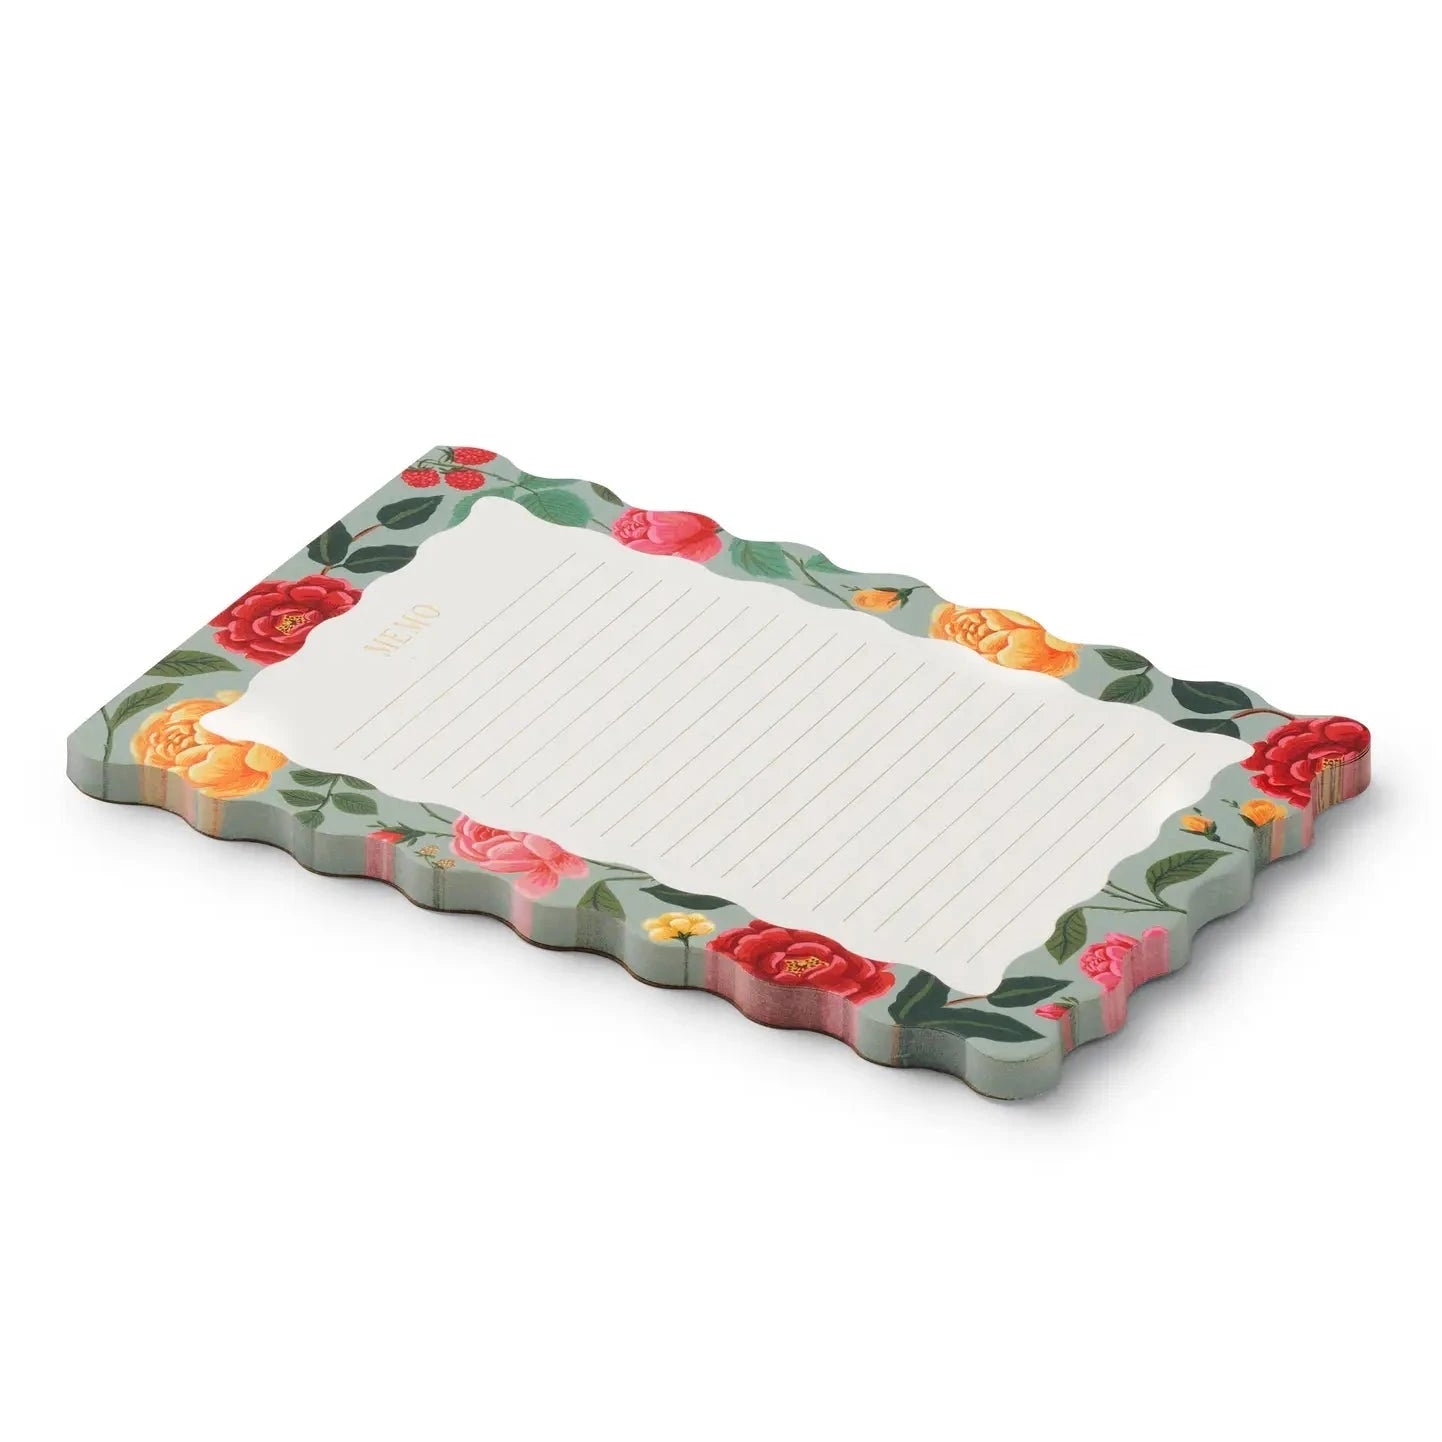 scalloped edge decorate this oversized notepad with roses on it